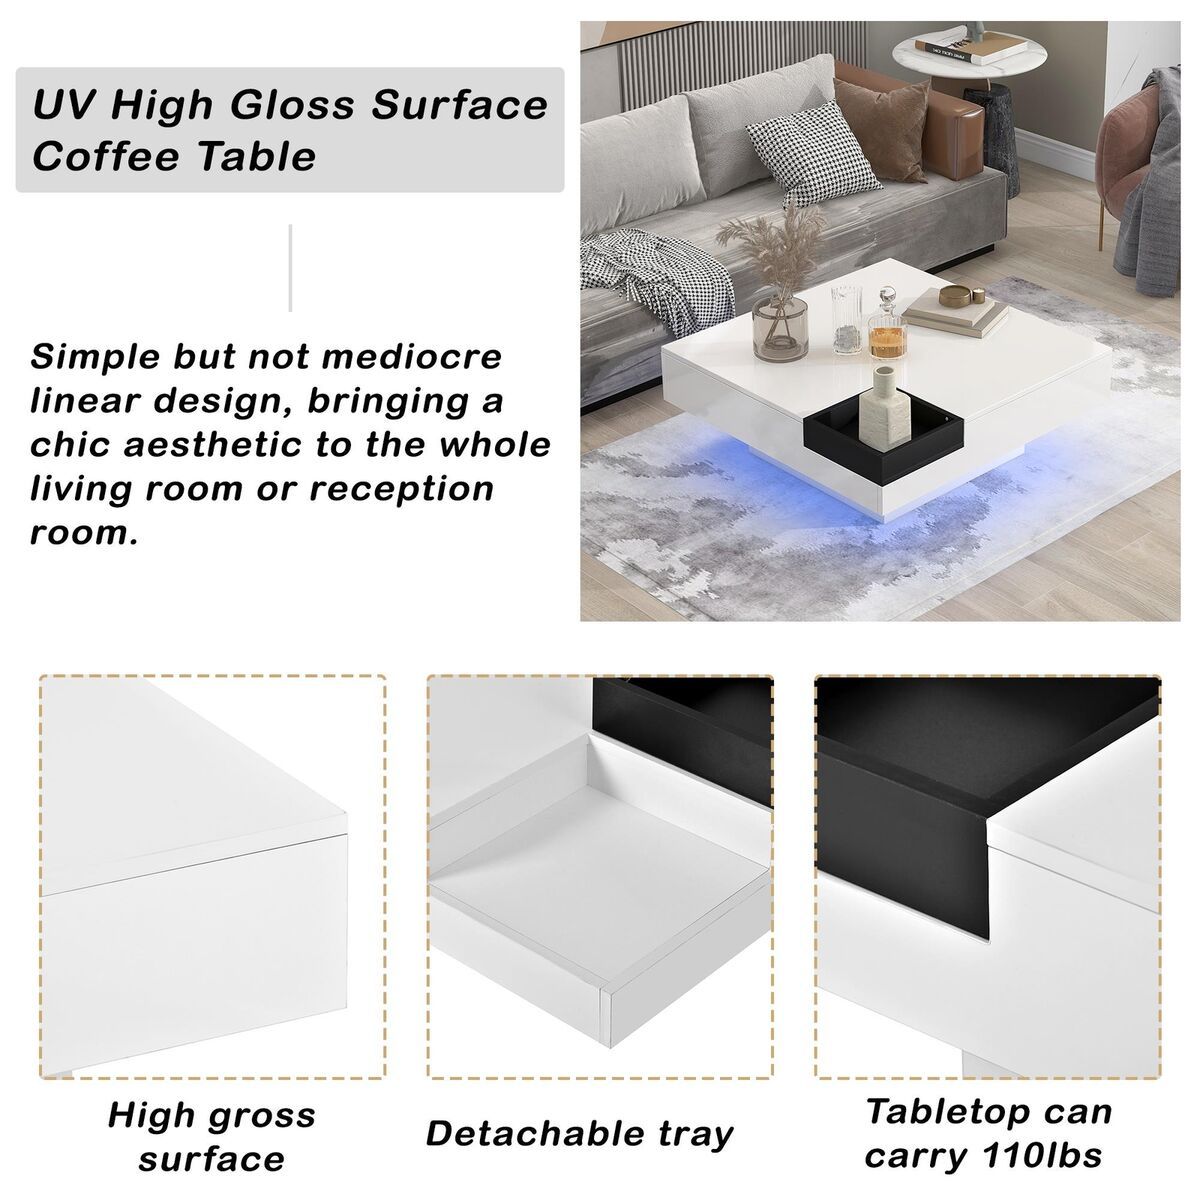 Coffee Table Modern Led Design With Detachable Tray High Glossy Furniture  White | Ebay Throughout Detachable Tray Coffee Tables (View 4 of 15)